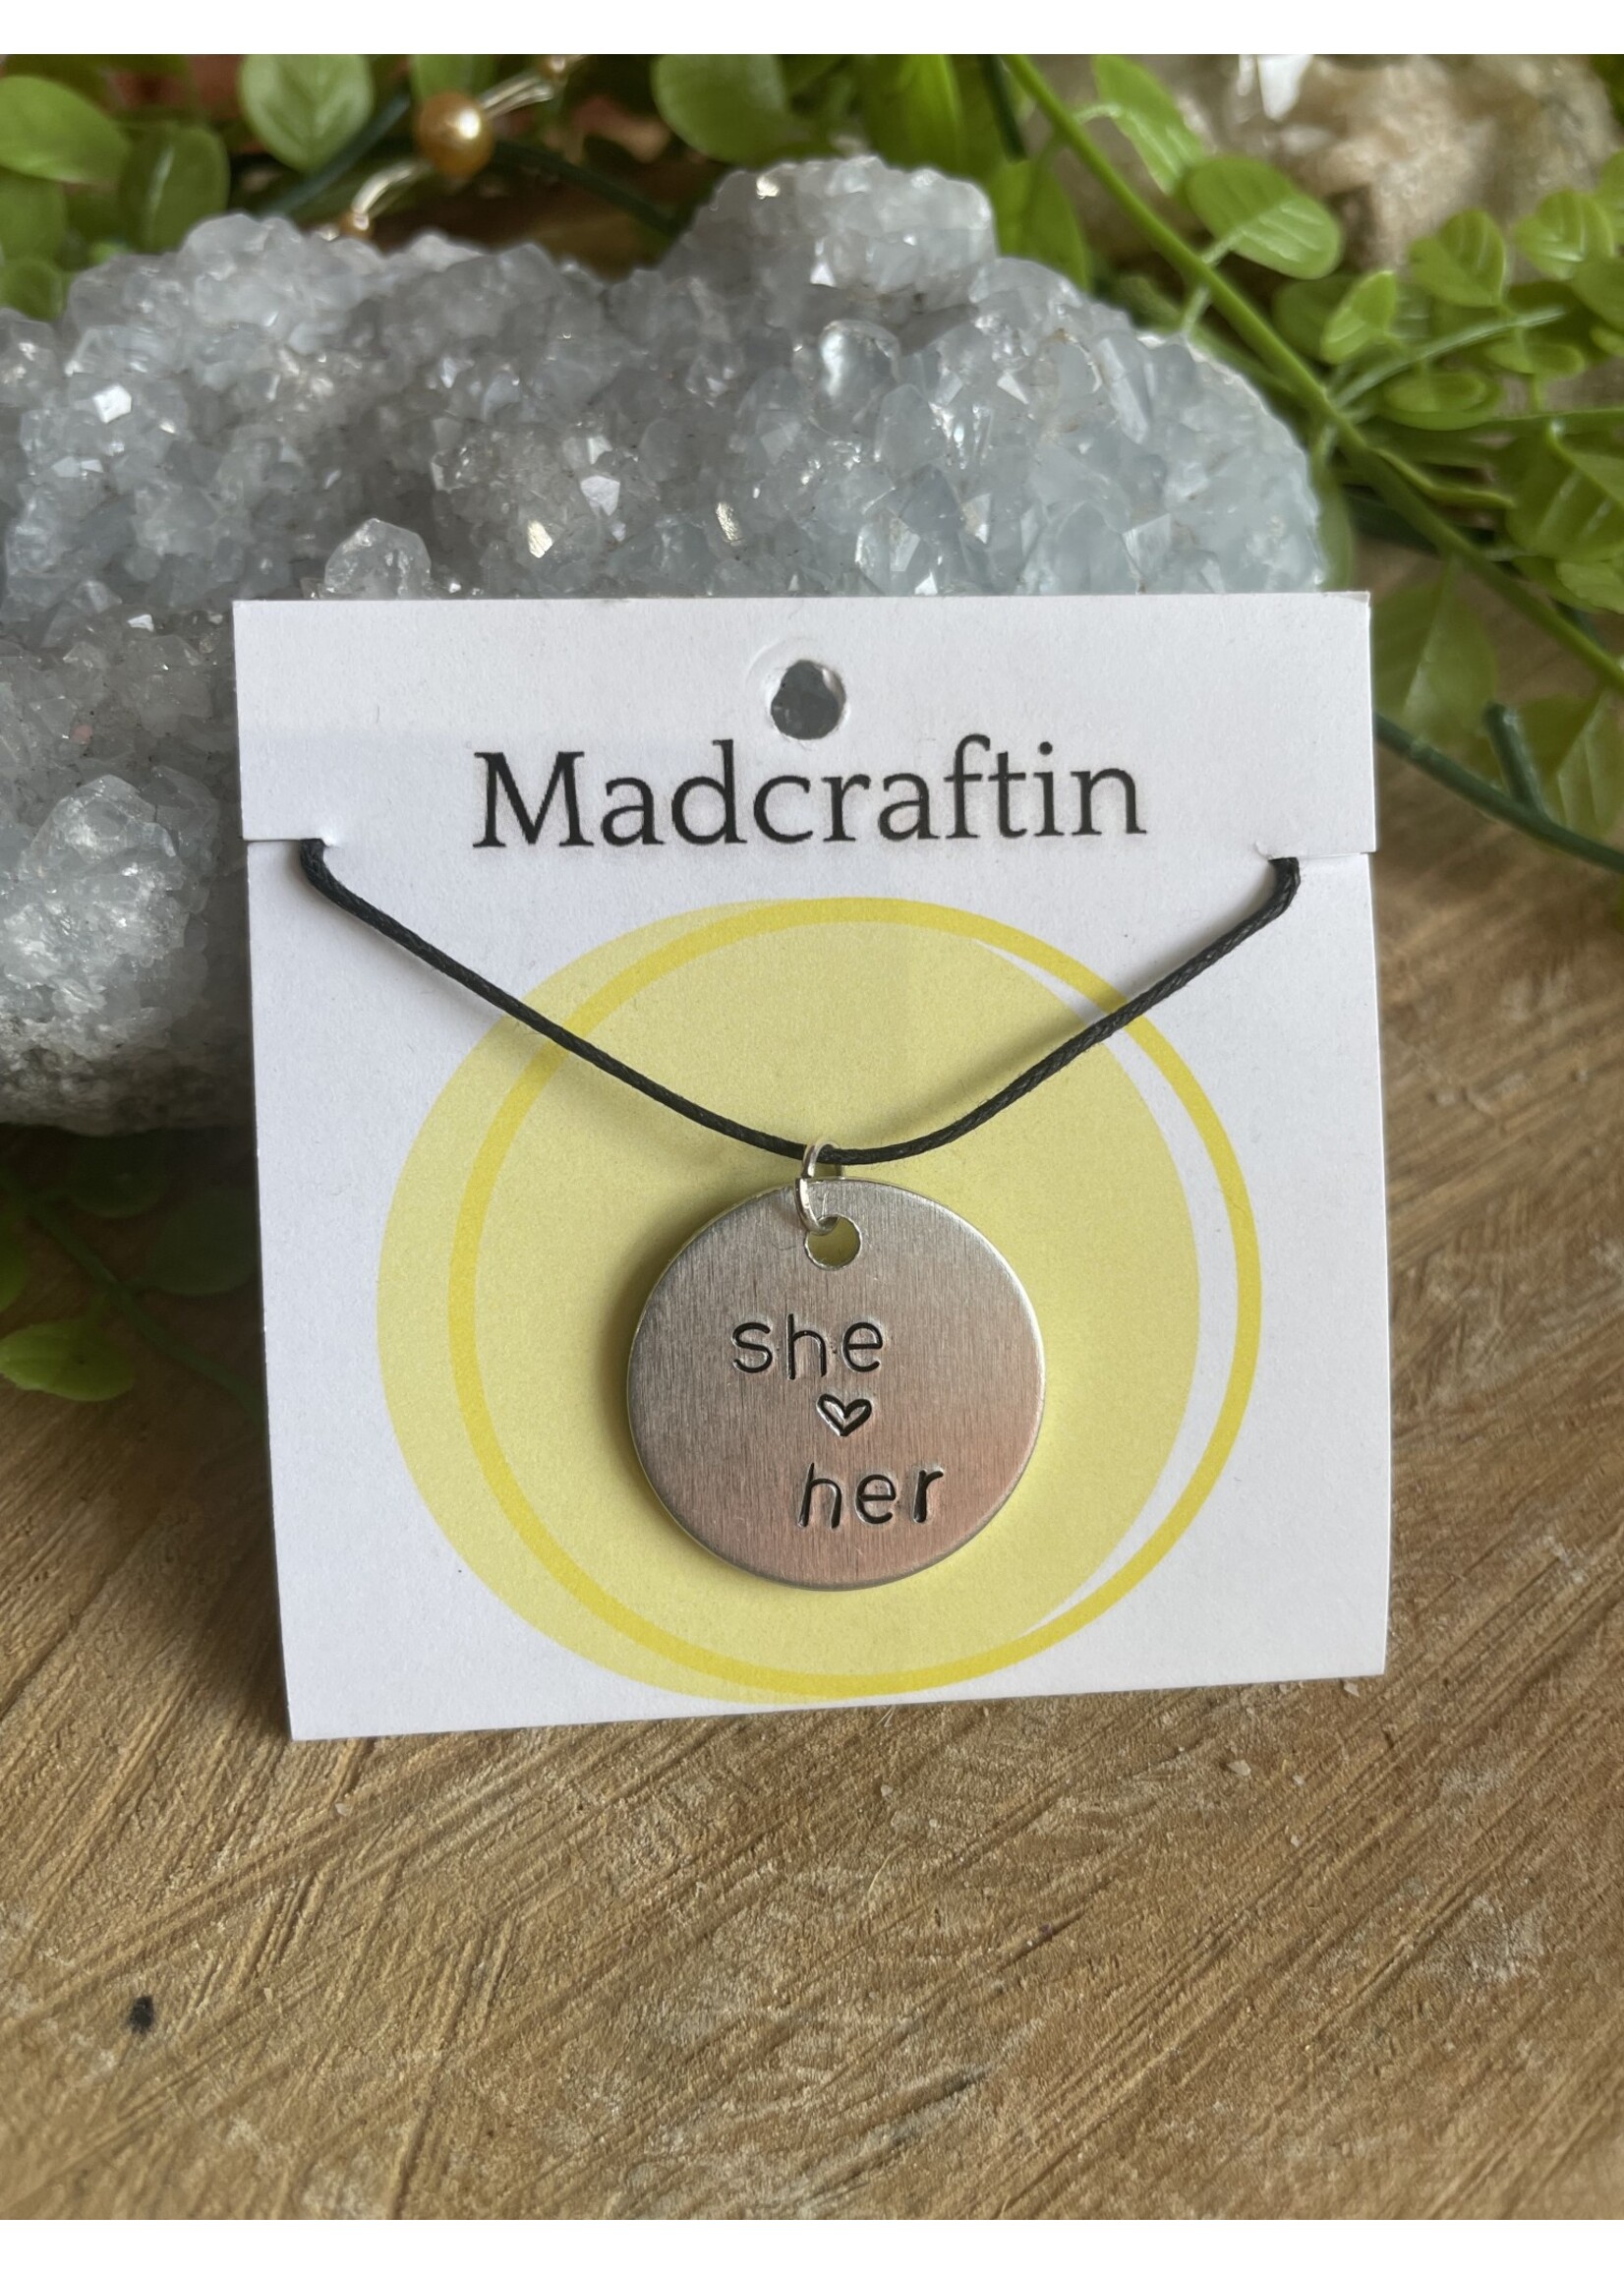 Madcraftin Stamped Pronoun Necklace